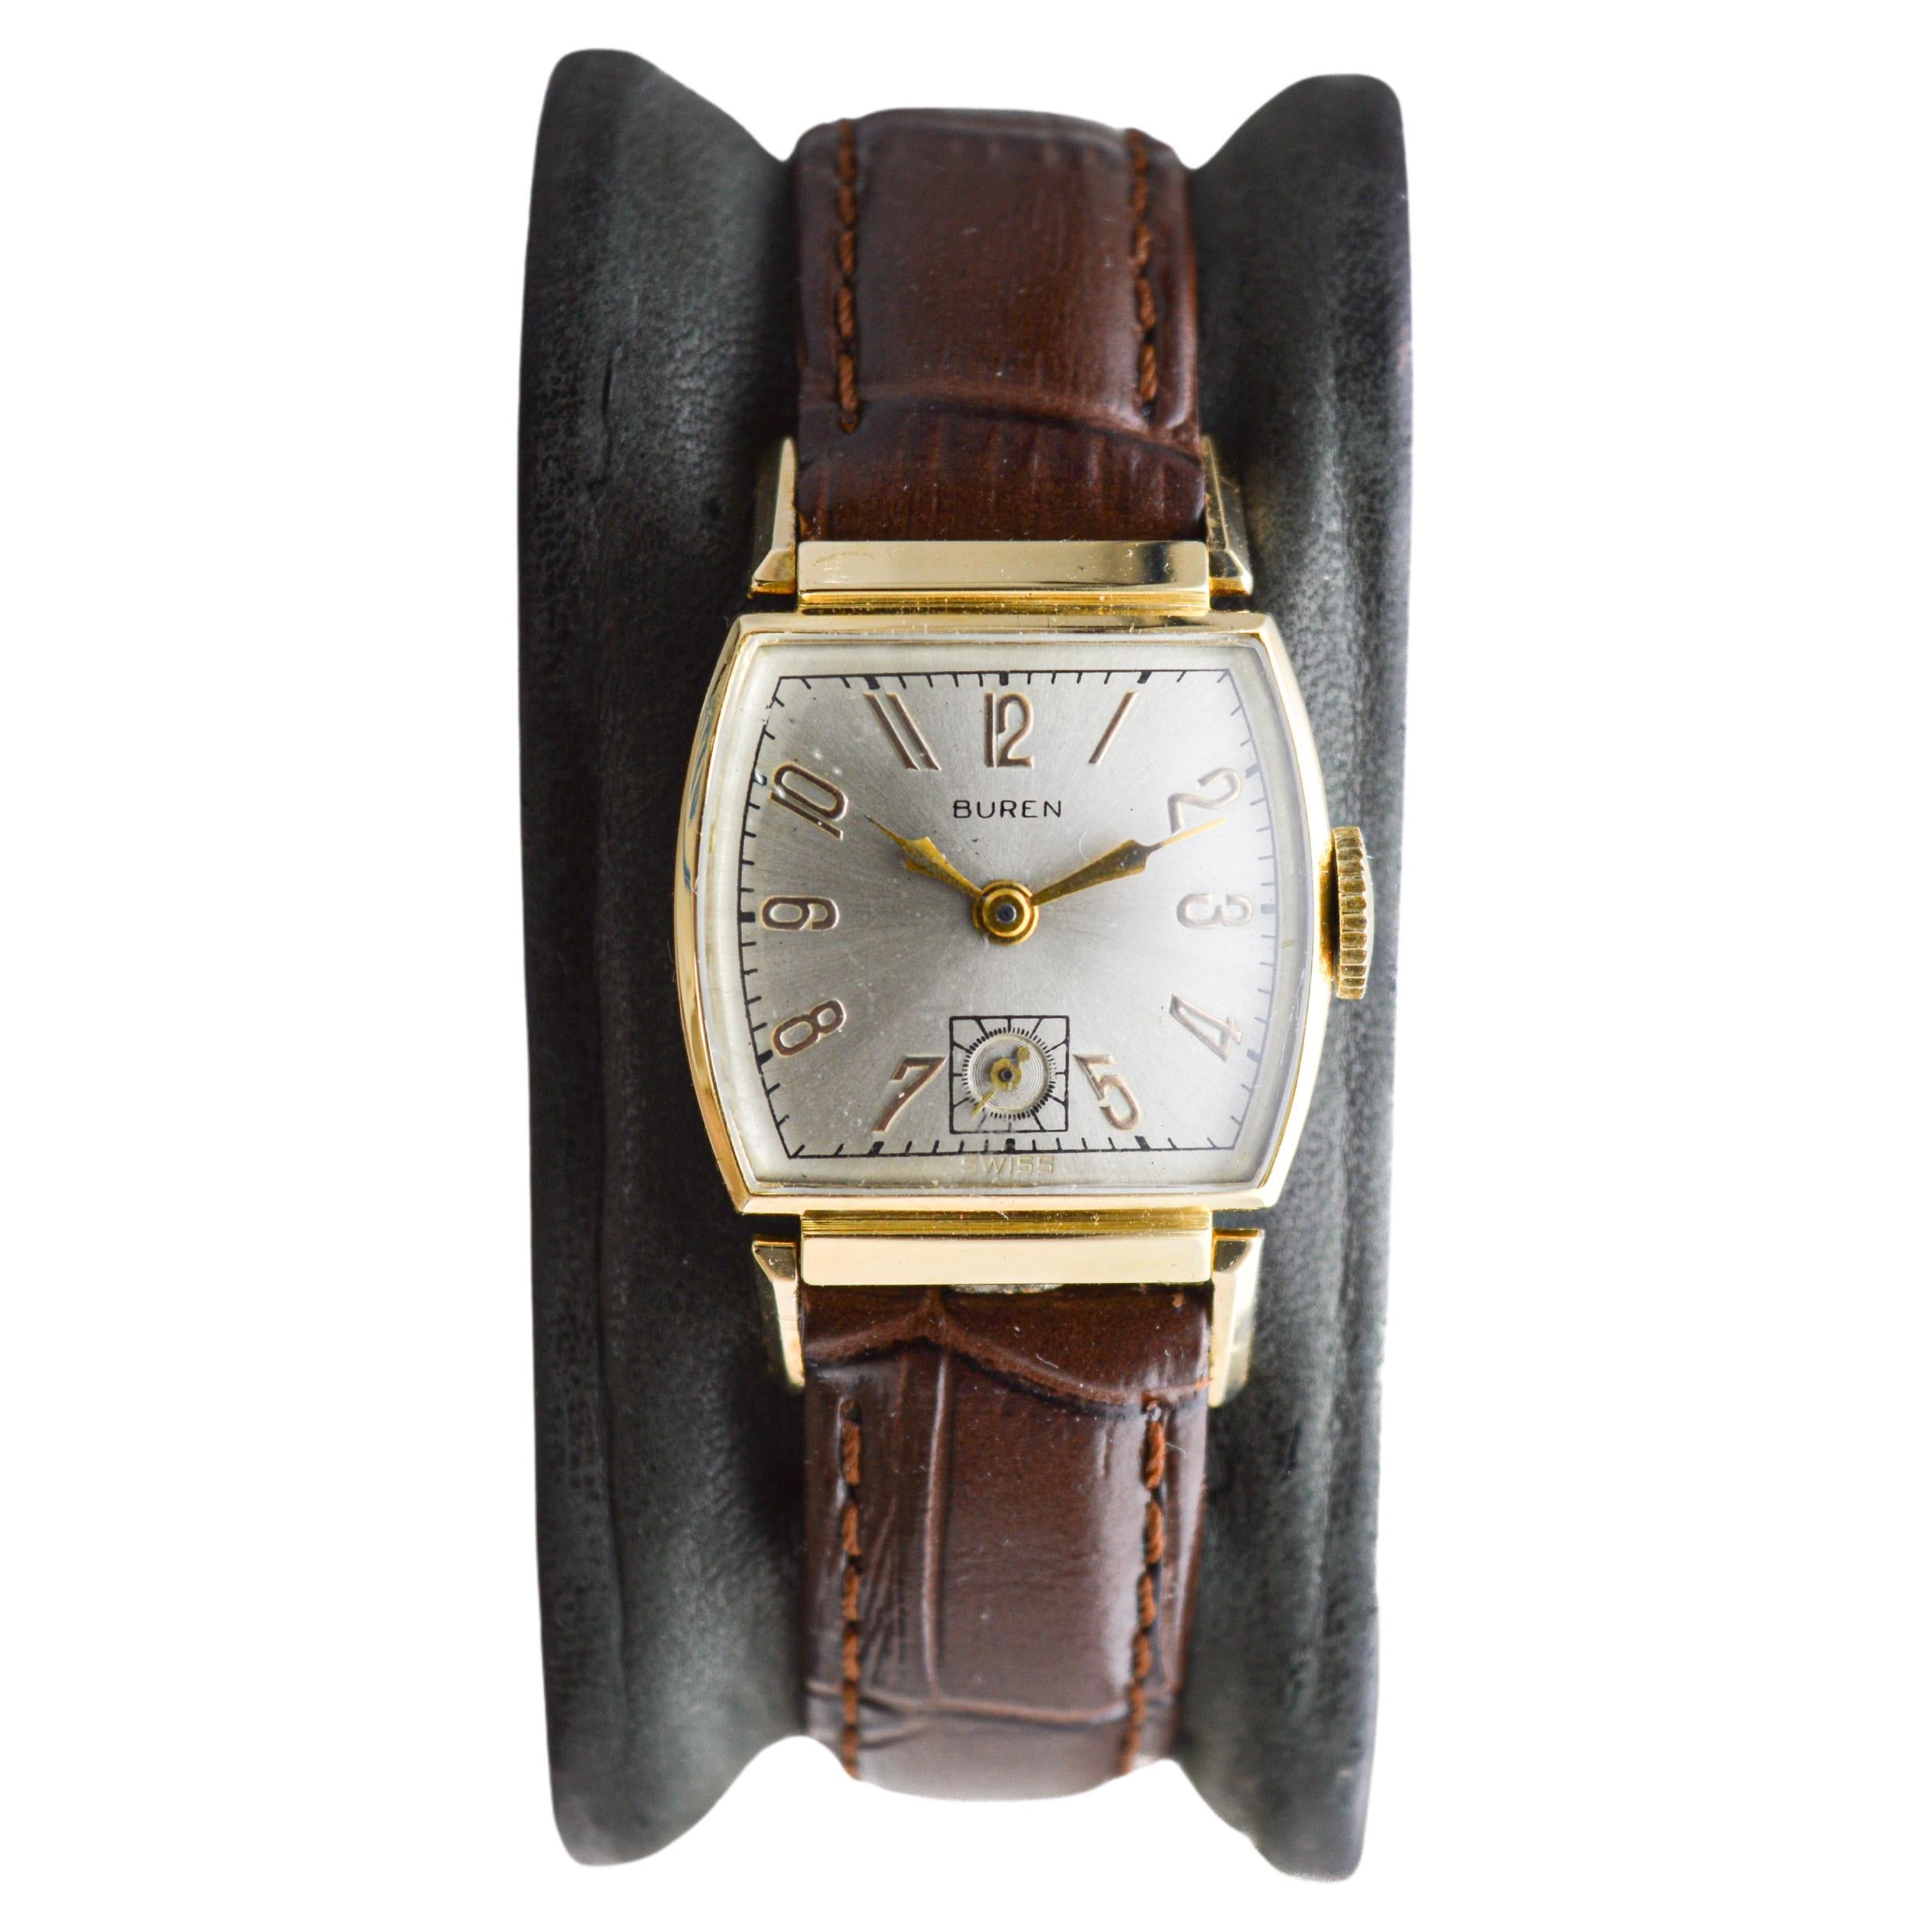 Buren Gold Filled Art Deco Watch with Articulated Lugs From the 1940's